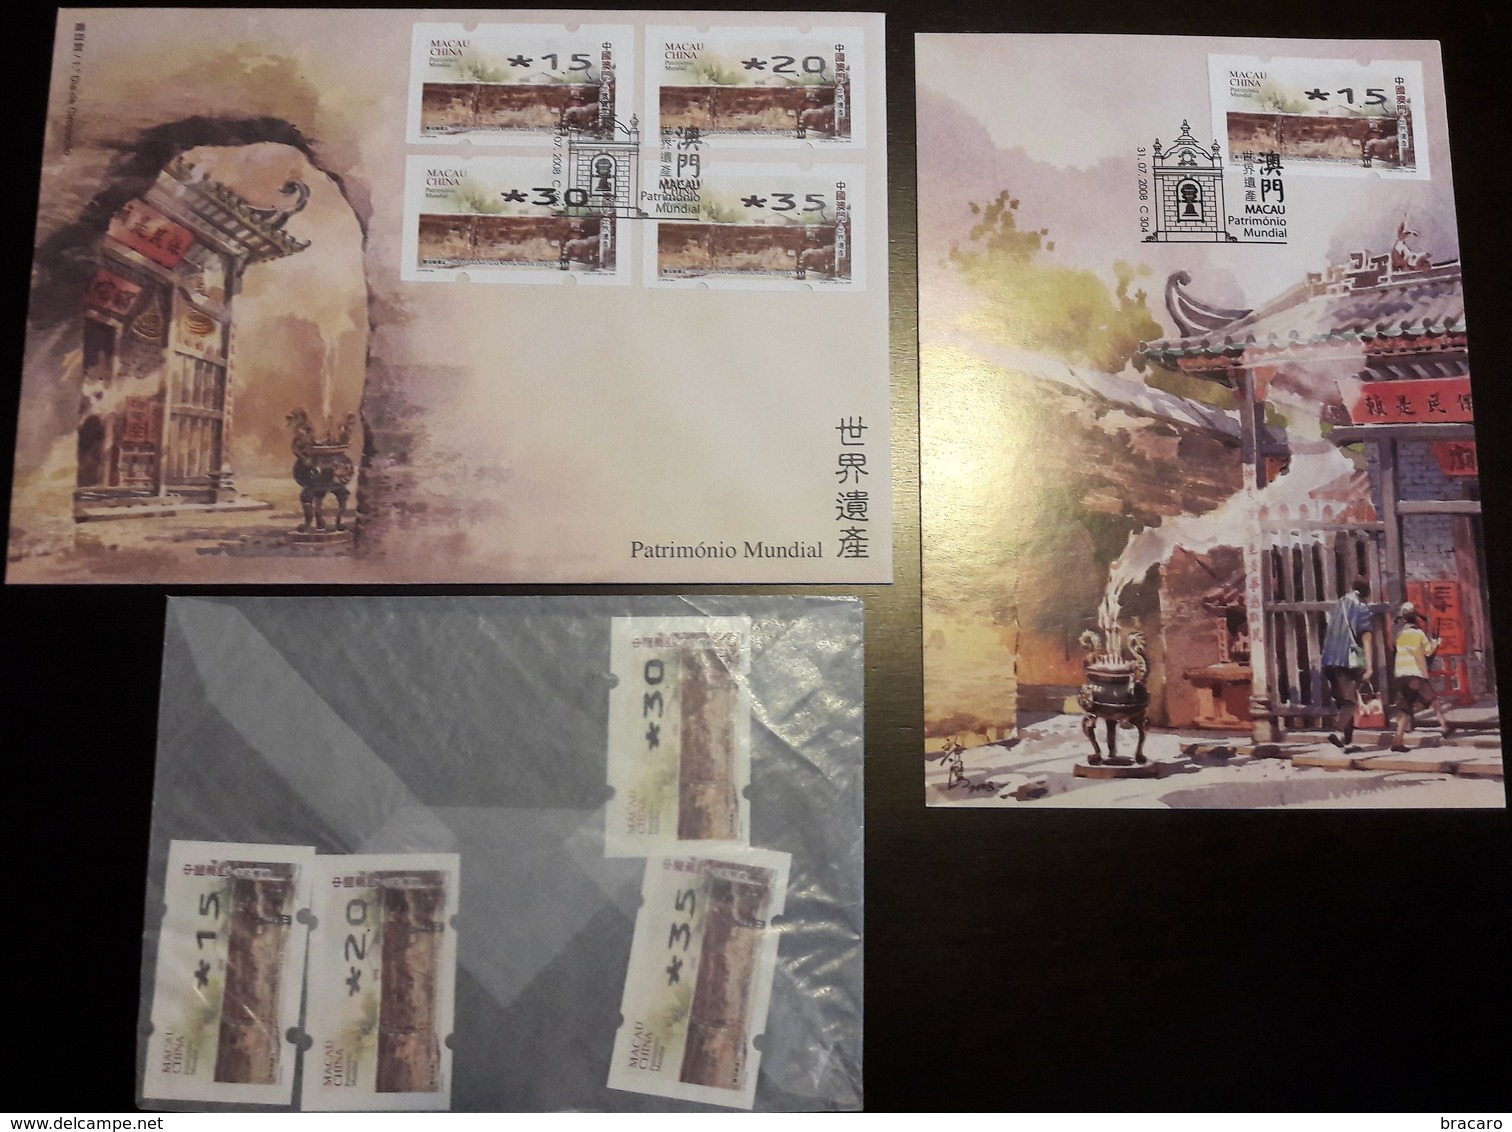 MACAU / MACAO (CHINA) - World Heritage 2008 - Full Set Stamps + FDC + 9 Maximum Cards + Full Set ATM + FDC ATM + Leaflet - Collections, Lots & Series